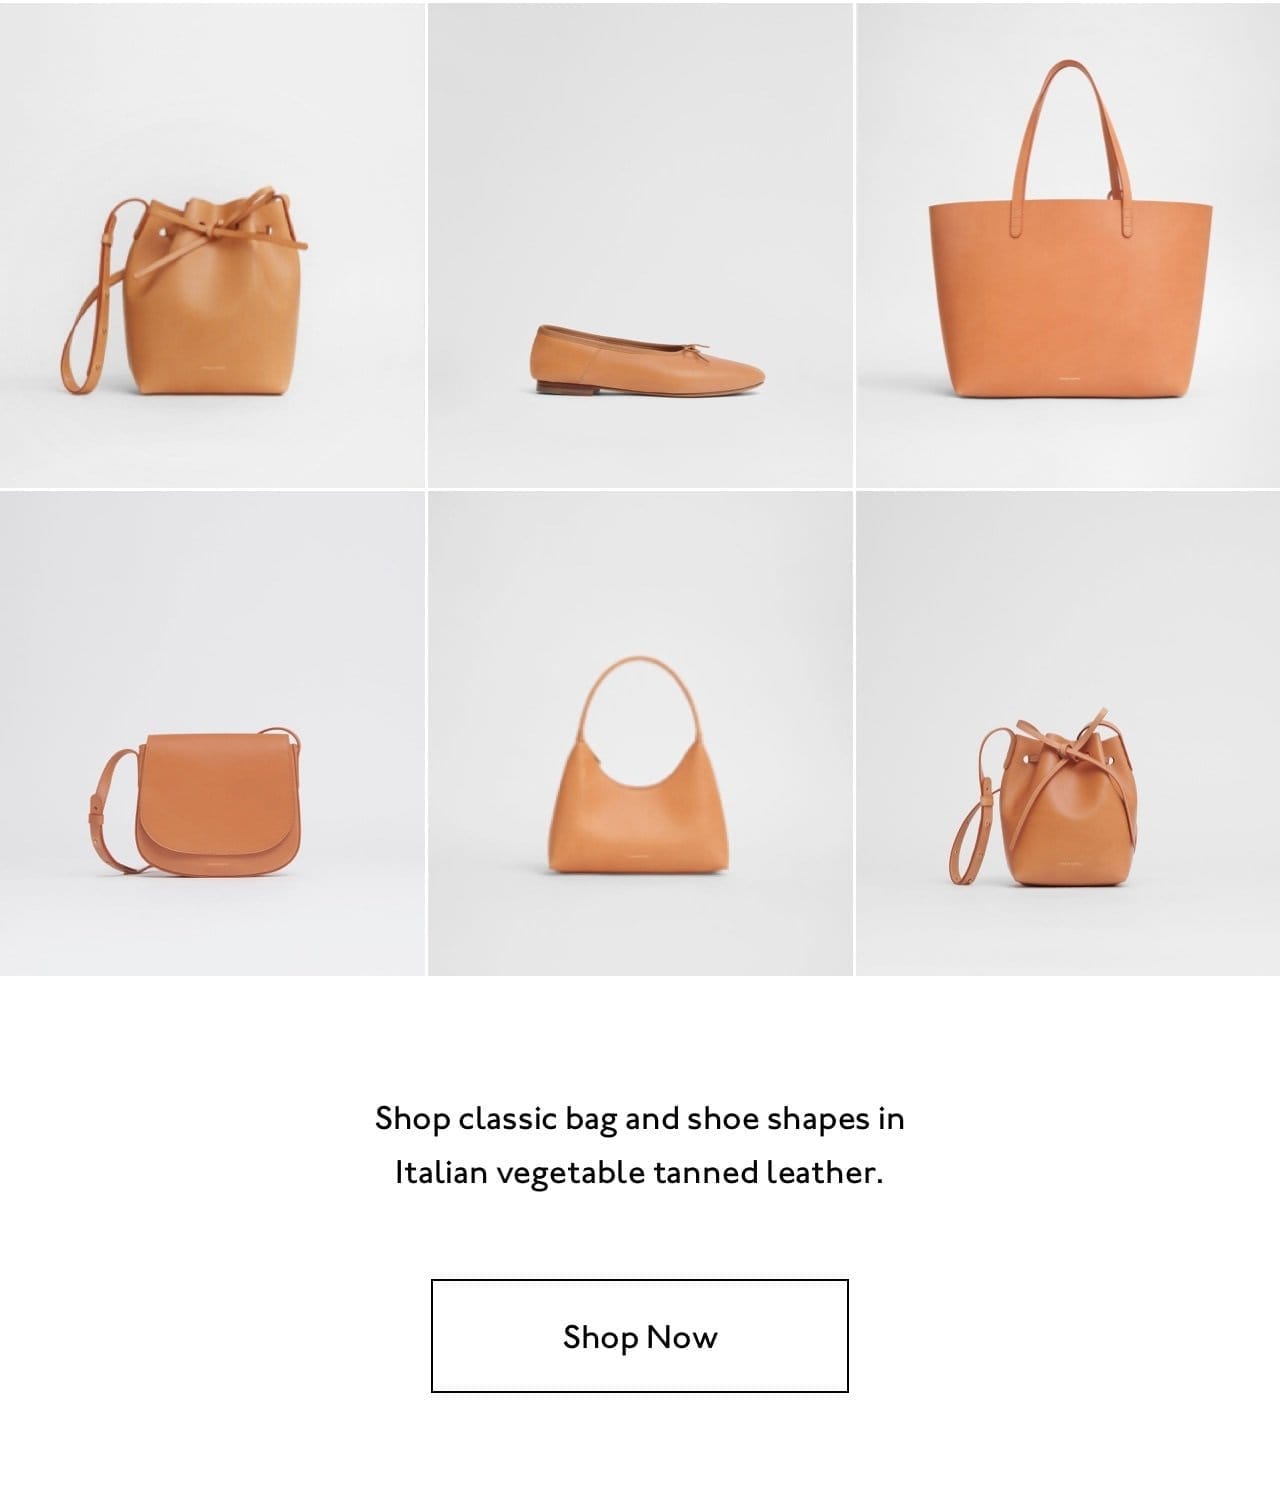 Shop classic bag and shoe shapes in Italian vegetable tanned leather.